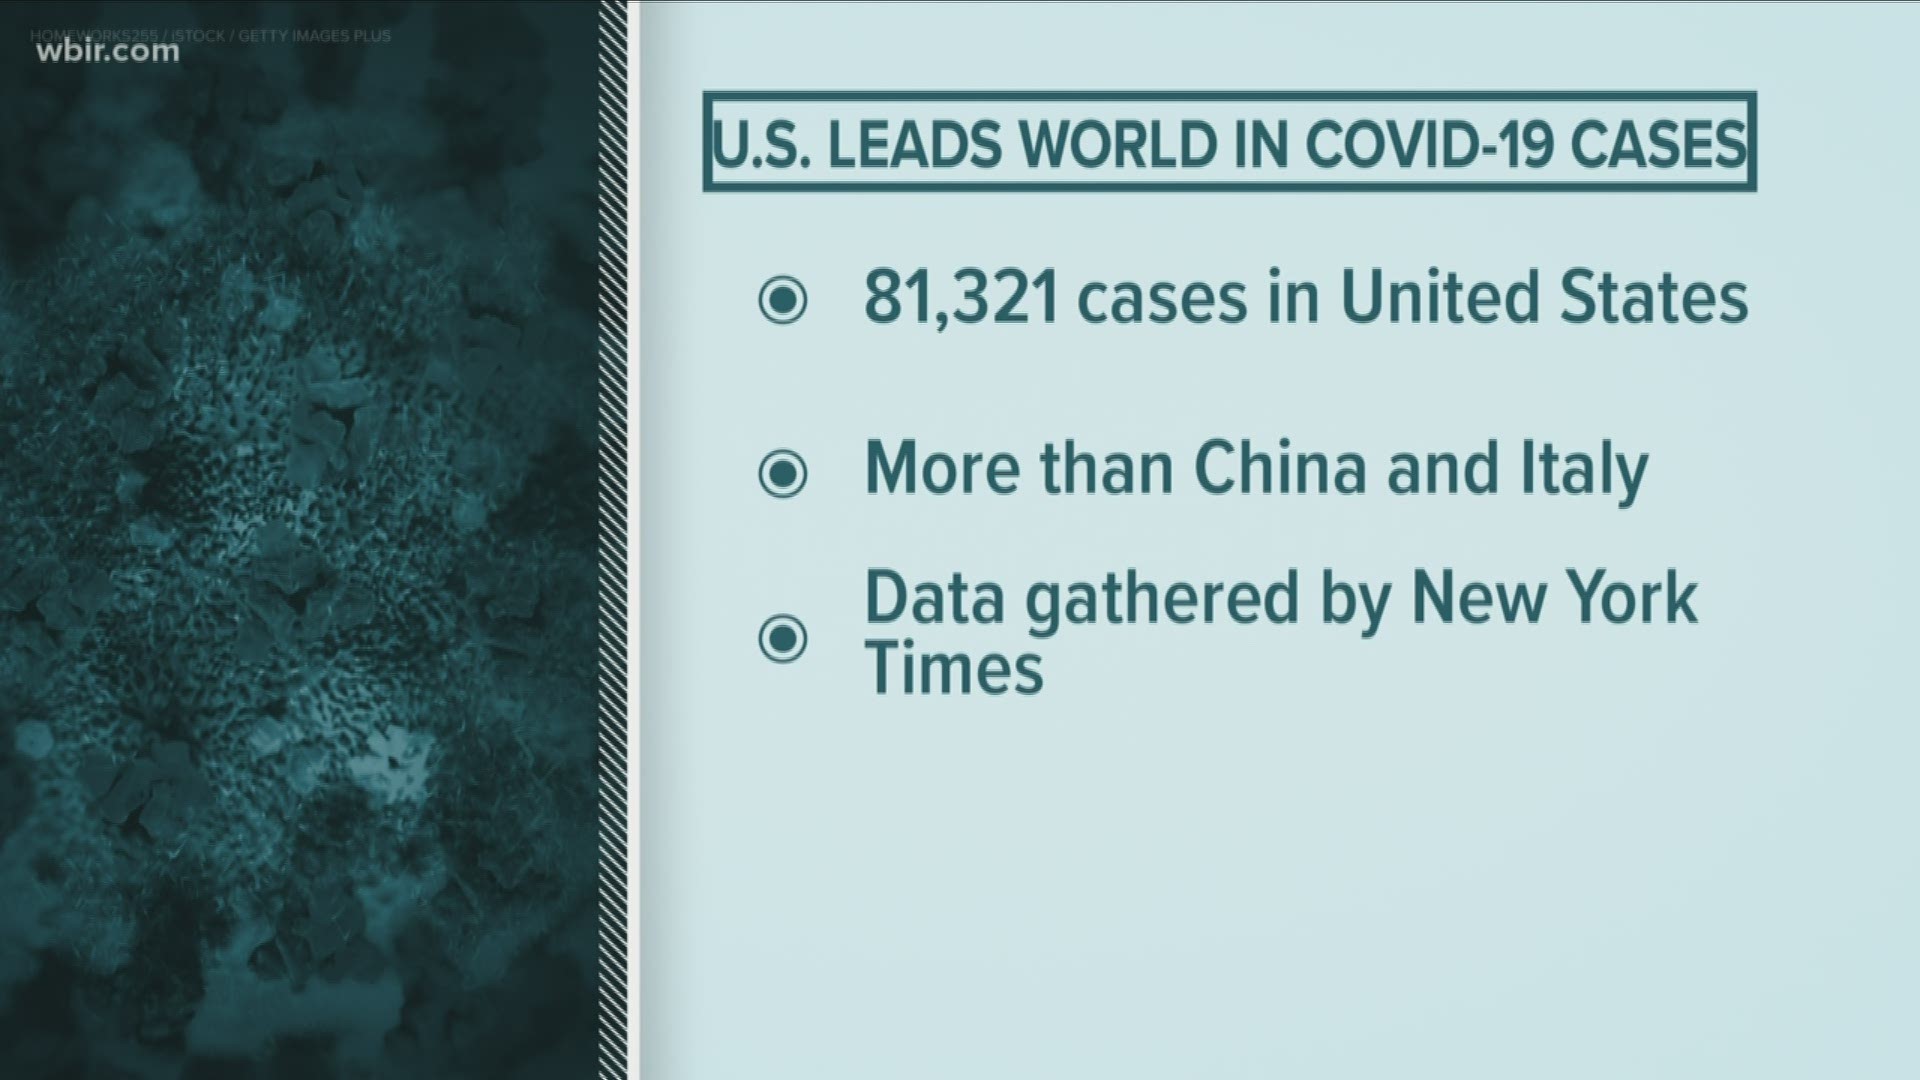 In the US, 81,321 people are known to have COVID-19.